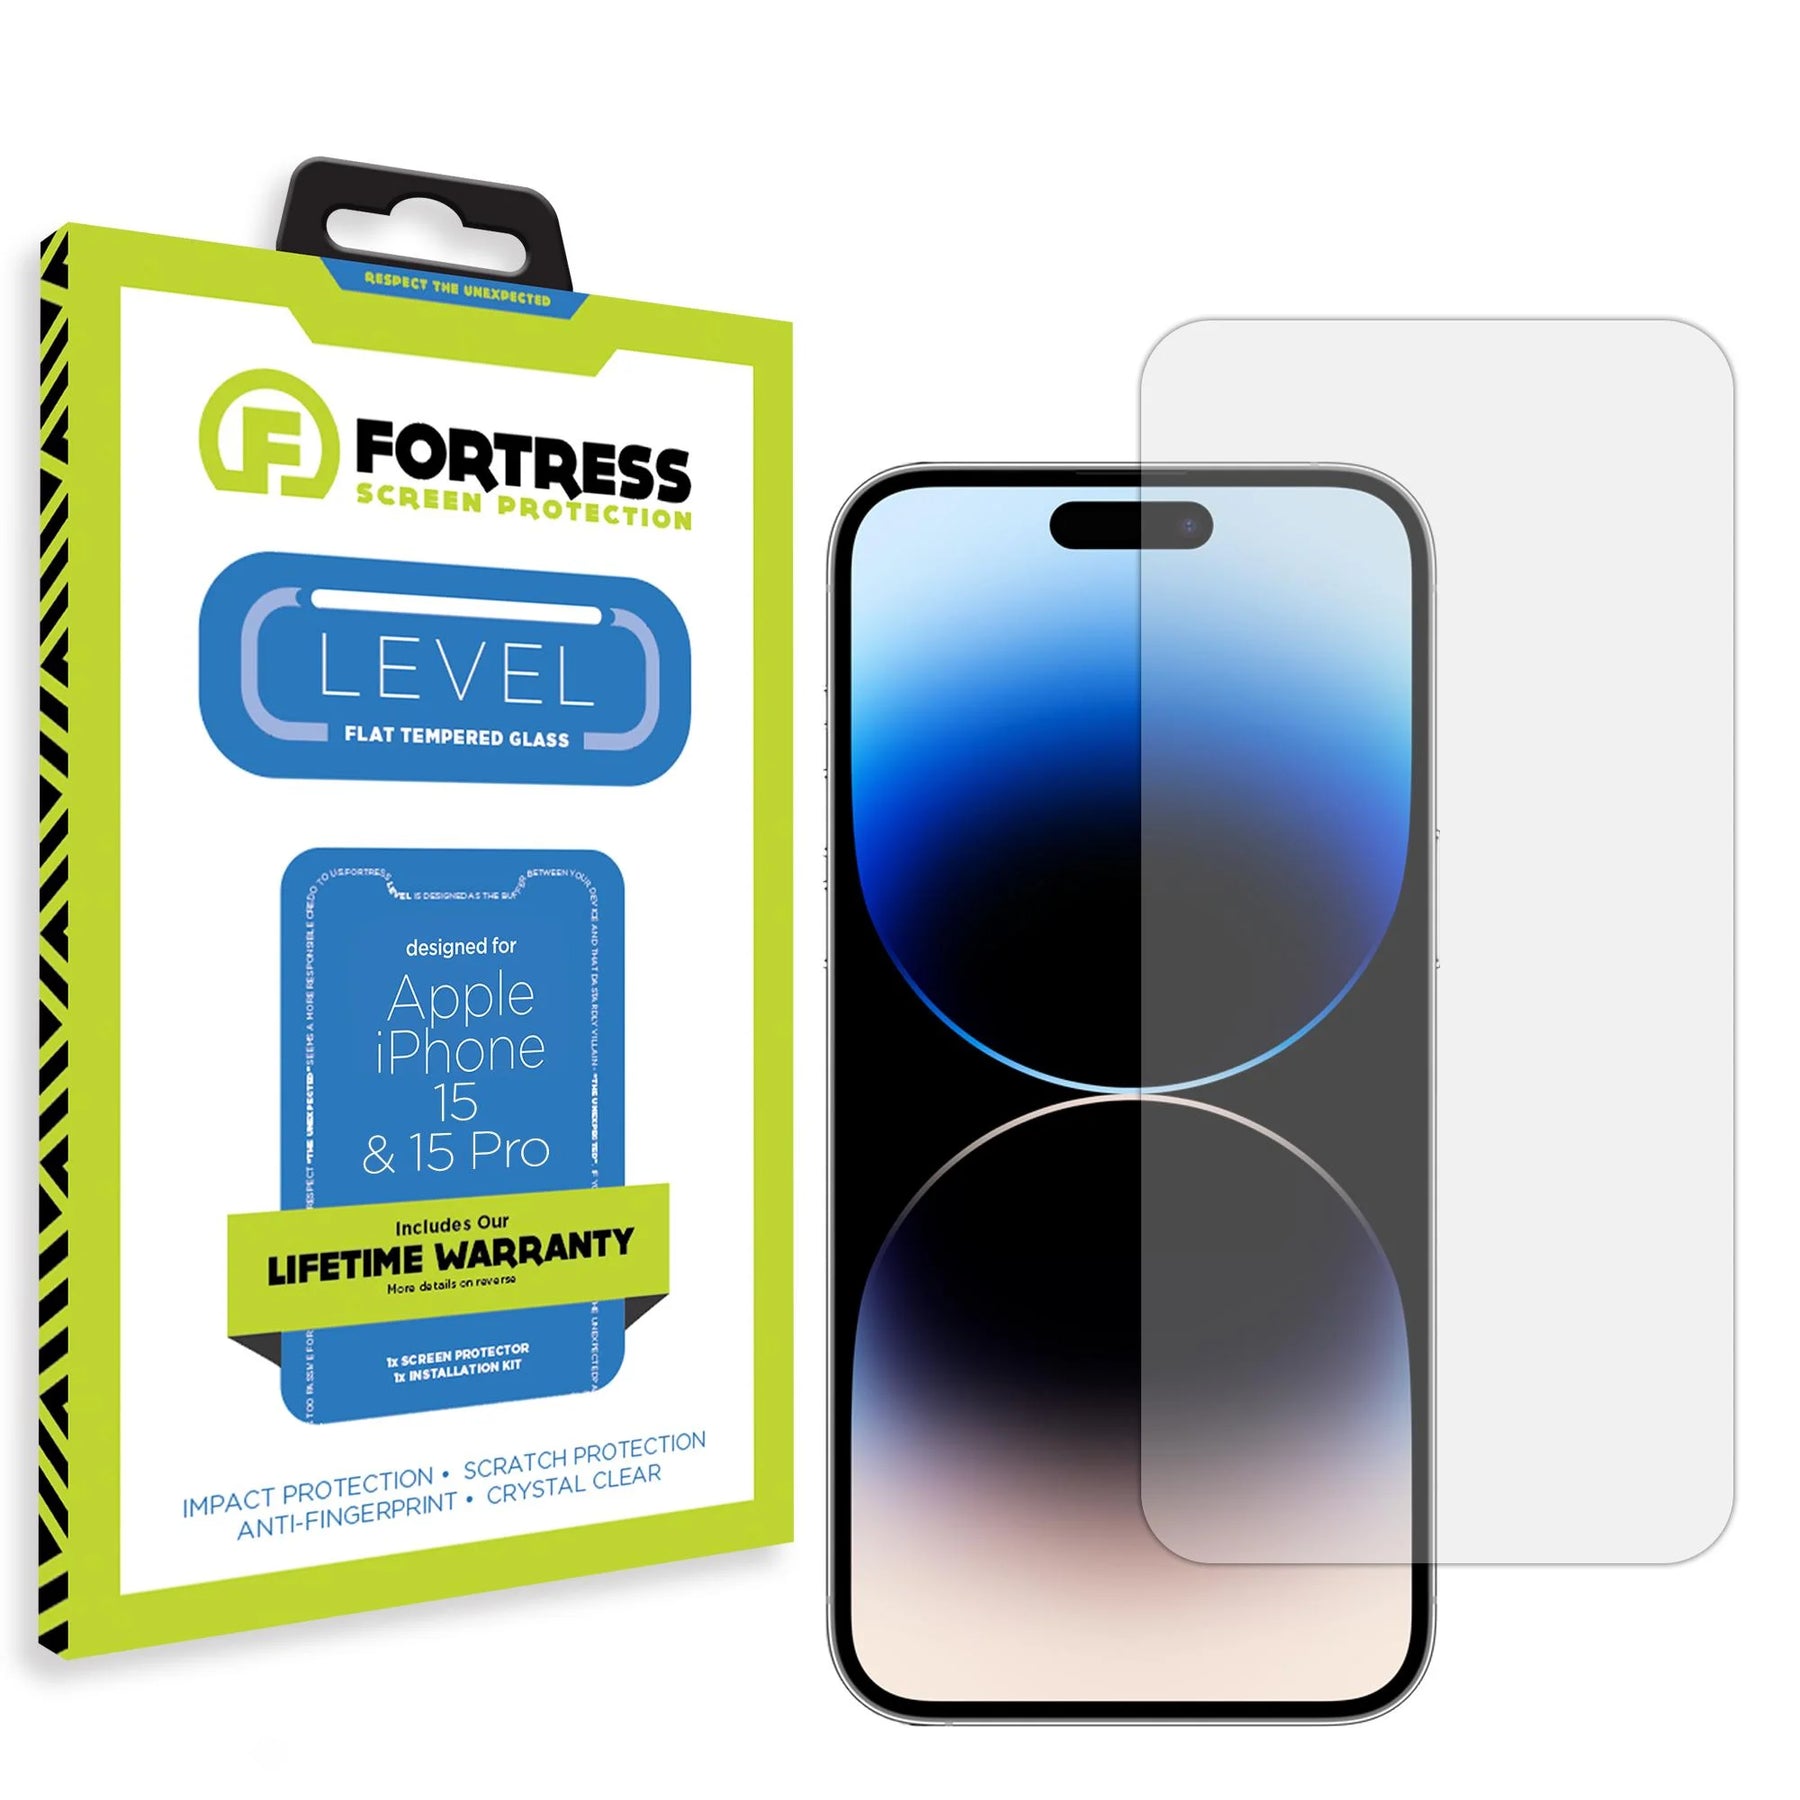 Fortress Fortress Warranty Replacement Program Apple-iPhone-15-Screen-Protector Warranty 8.99